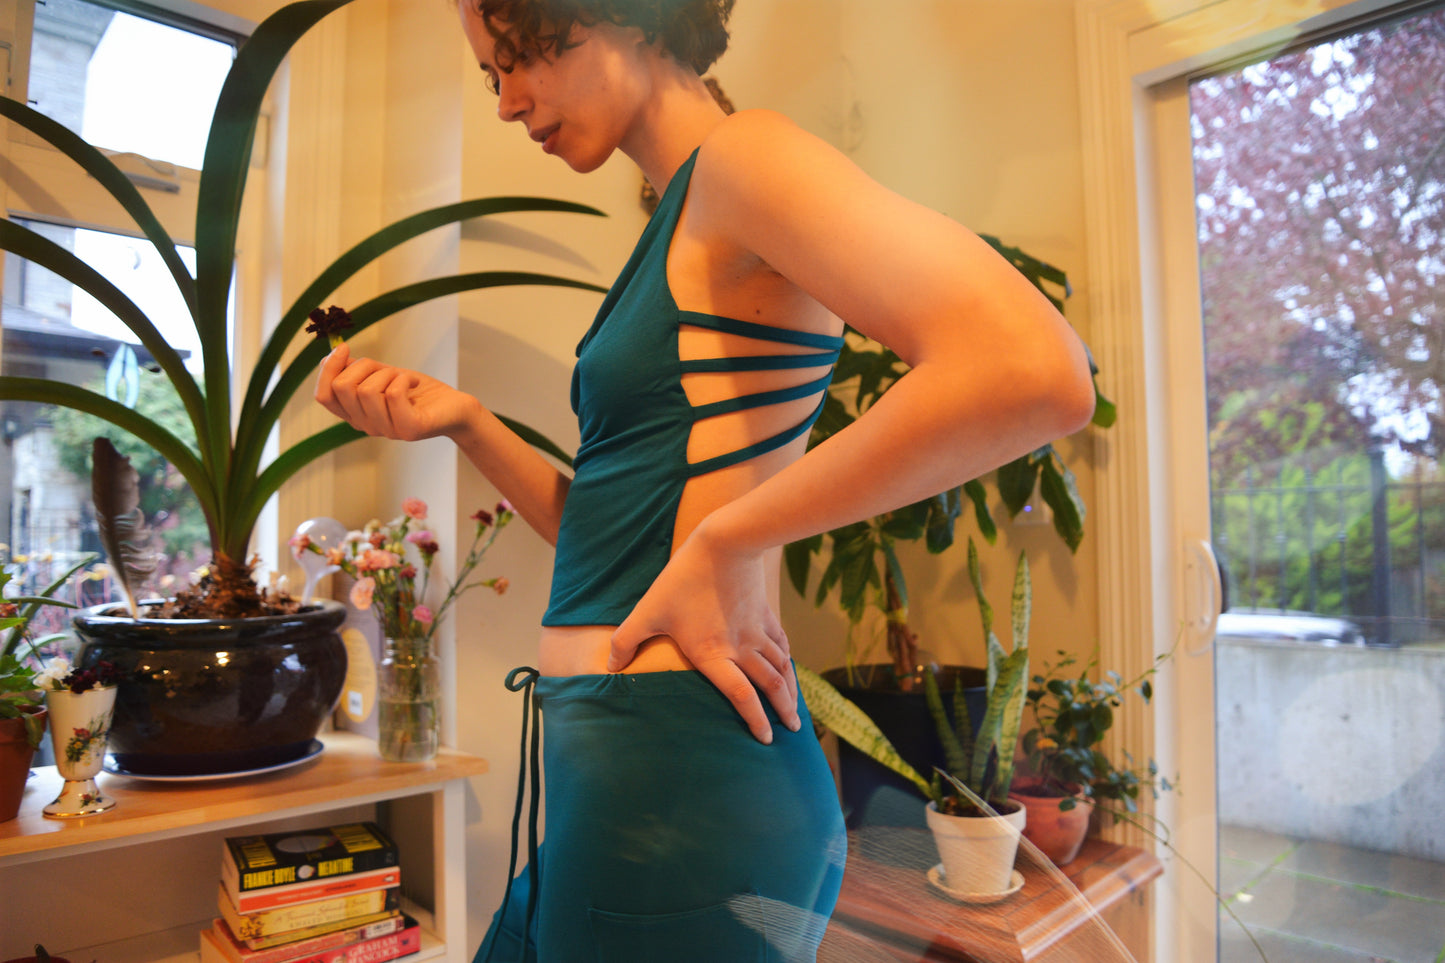 Open Back Bamboo teal top/ go bra-less